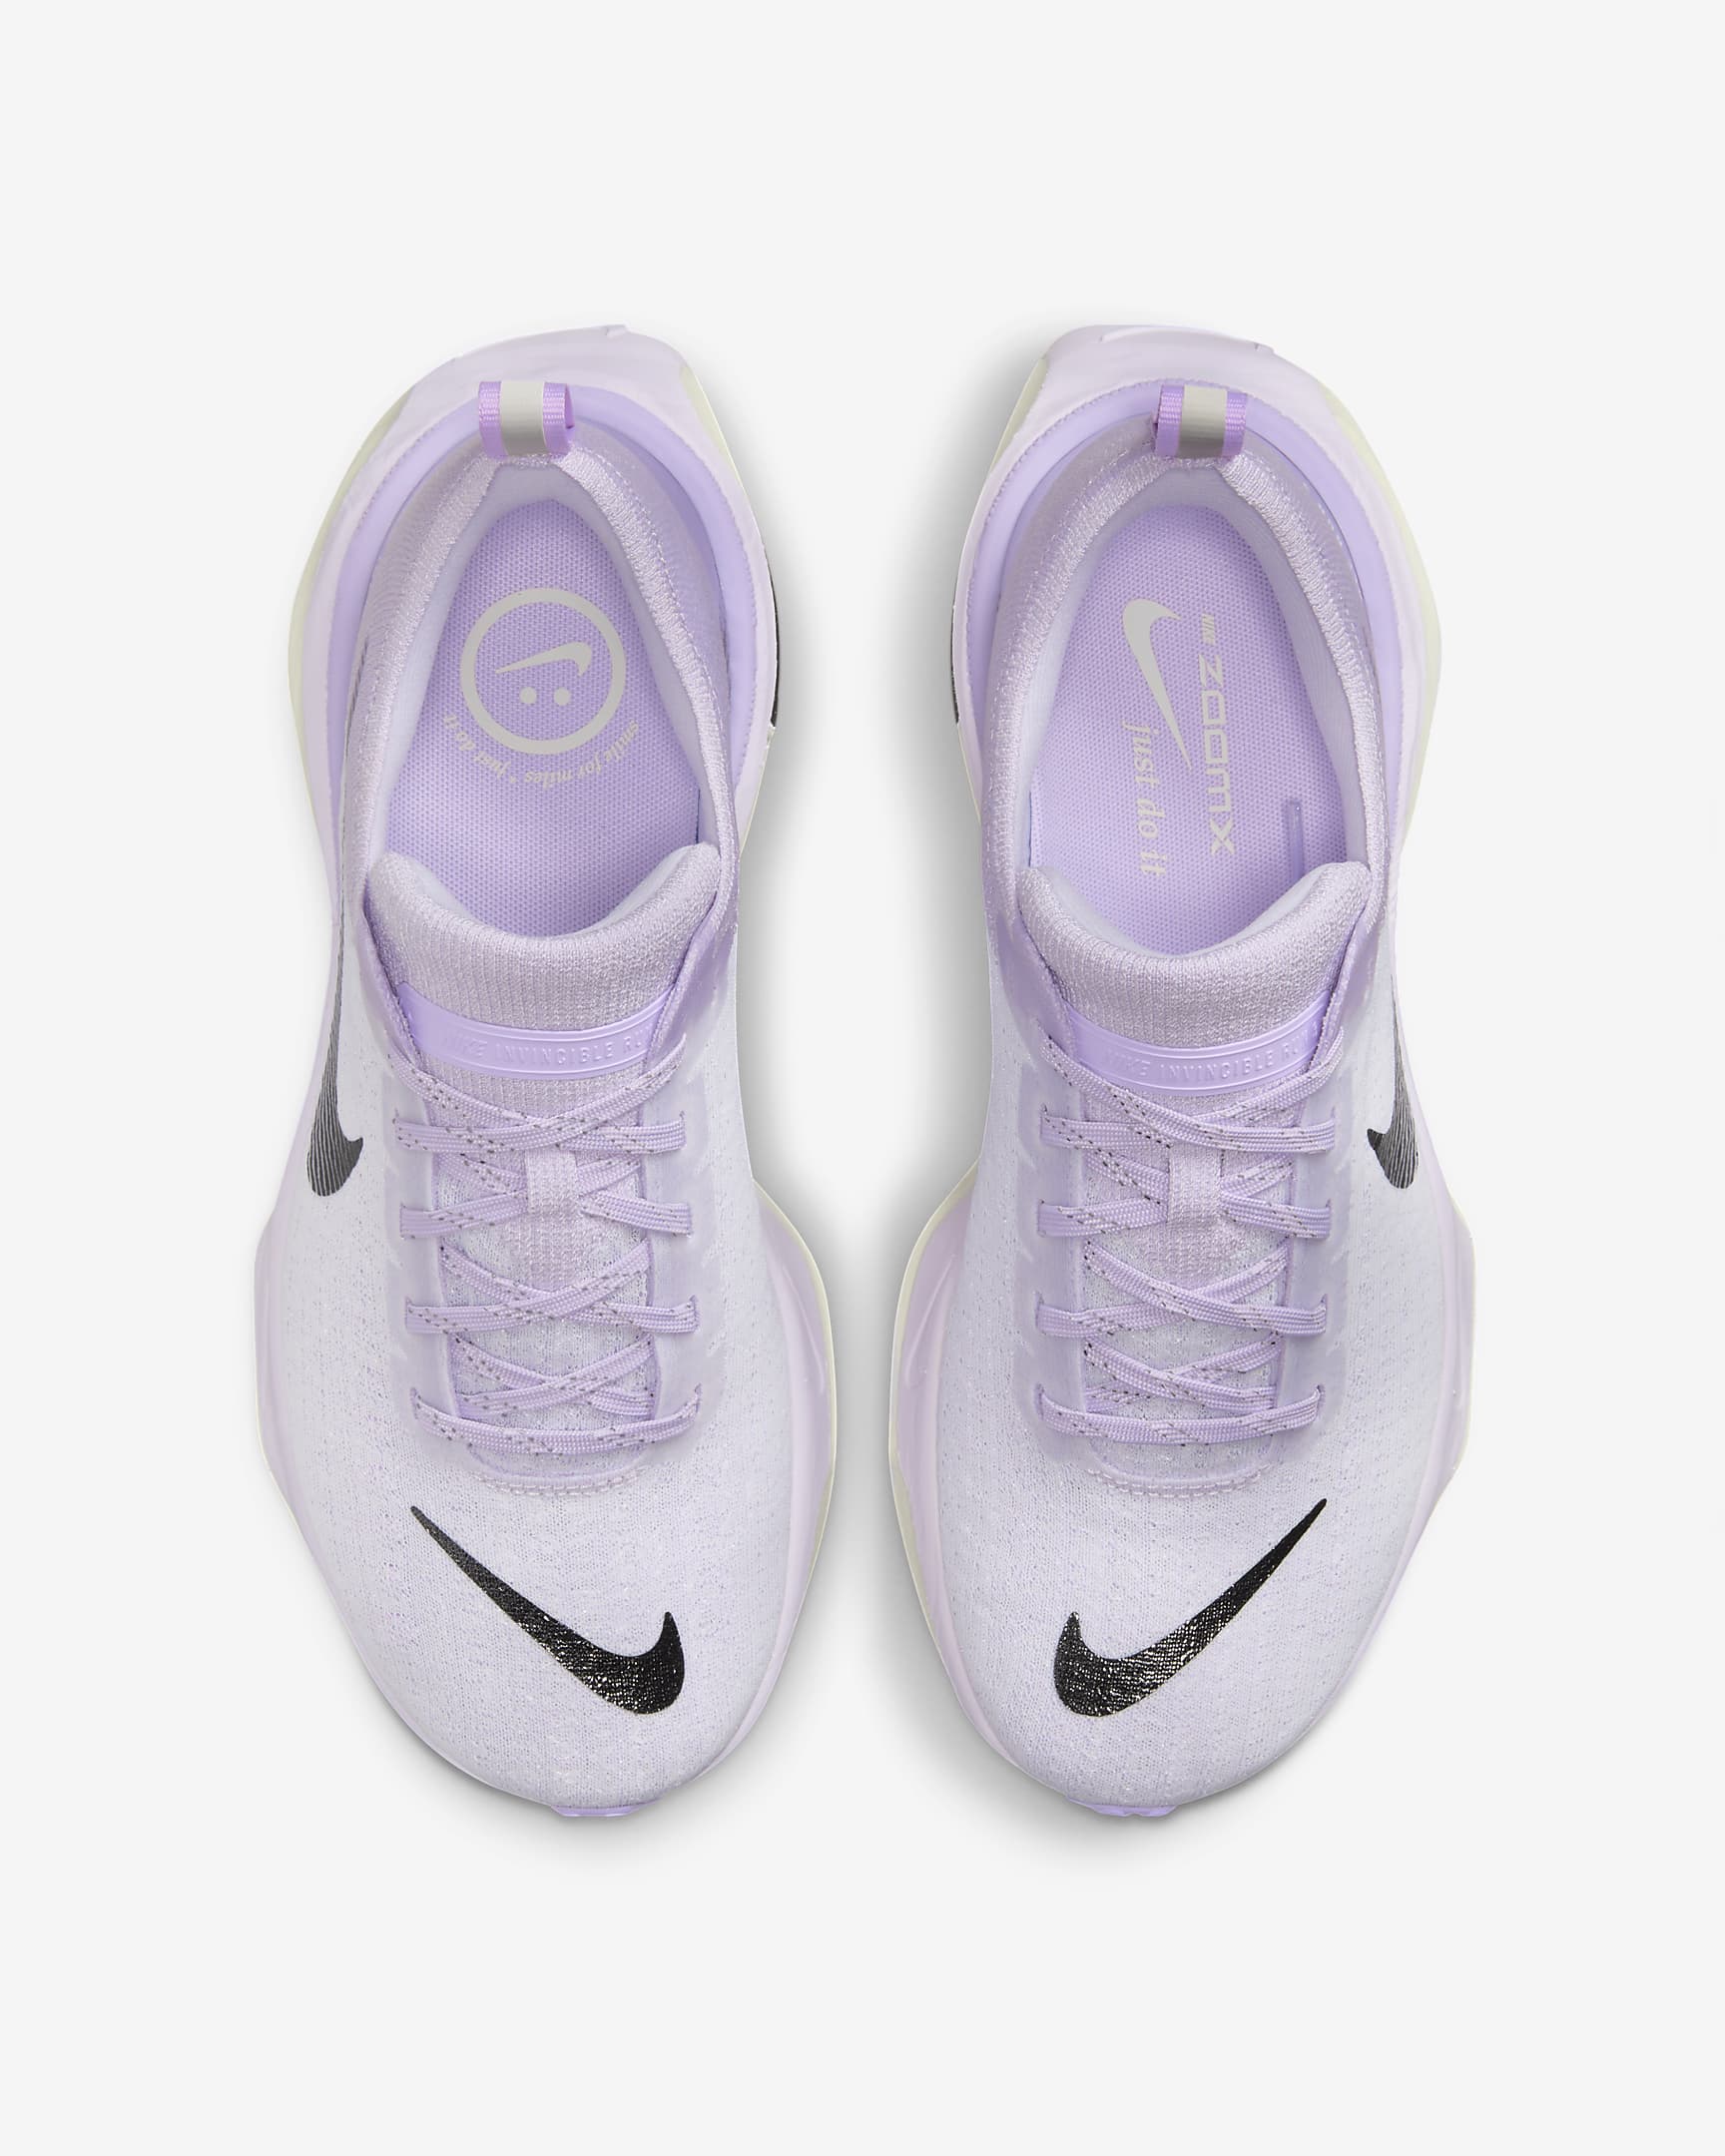 Nike Invincible 3 Women's Road Running Shoes - Barely Grape/Lilac Bloom/Sail/Black